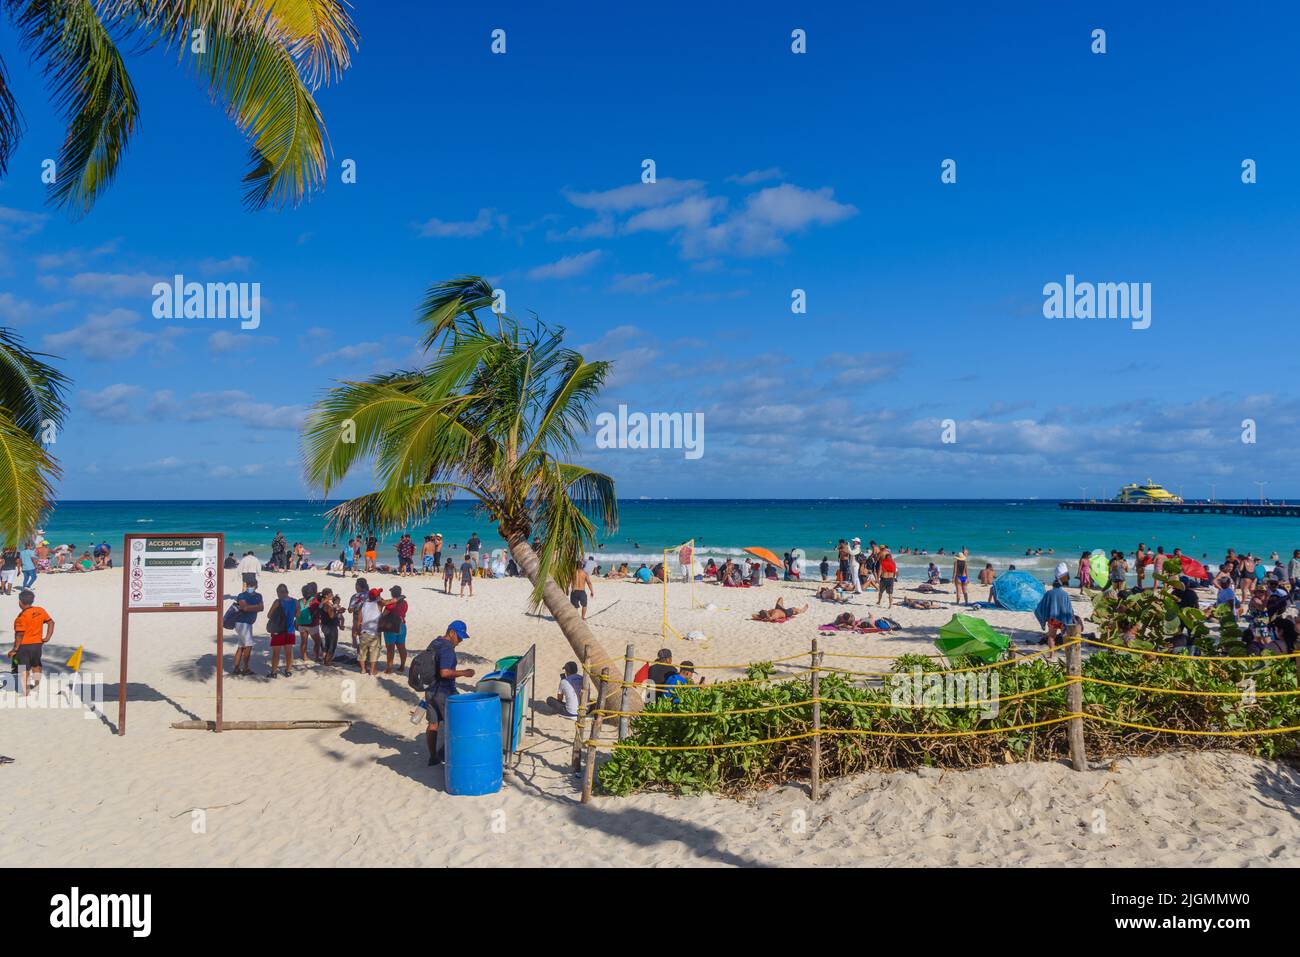 People on the sandy beach with cocos palms in Playa del Carmen, Yukatan, Mexico. Stock Photo